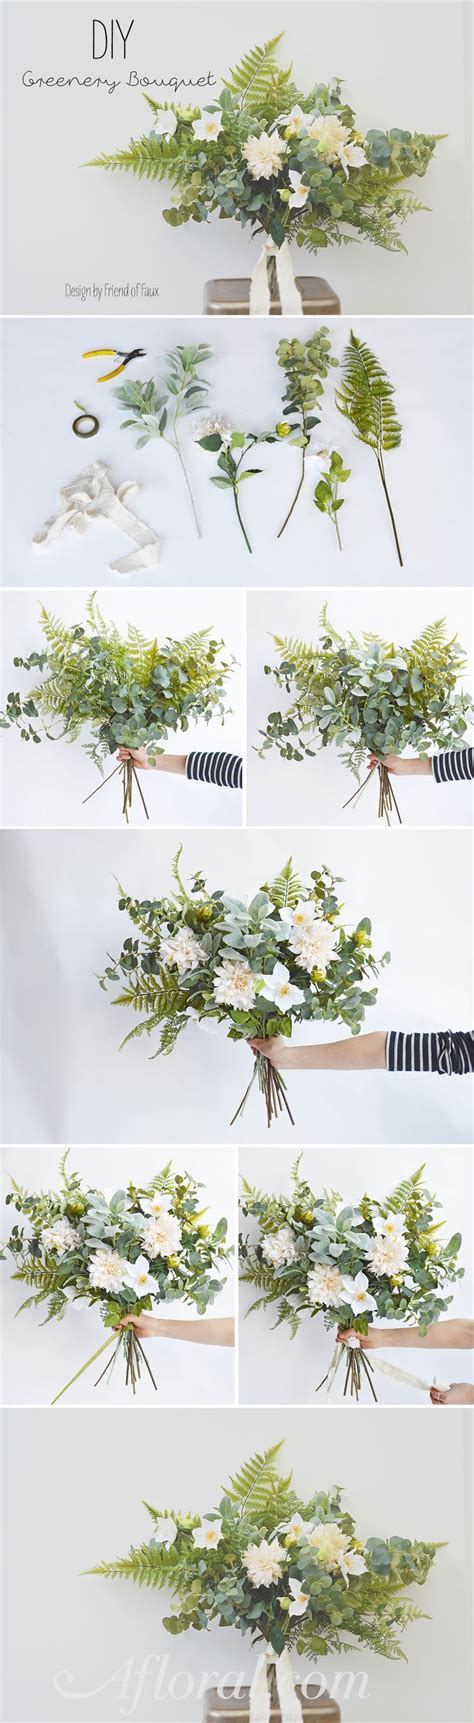 The Instructions To Make A Flower Arrangement With Greenery